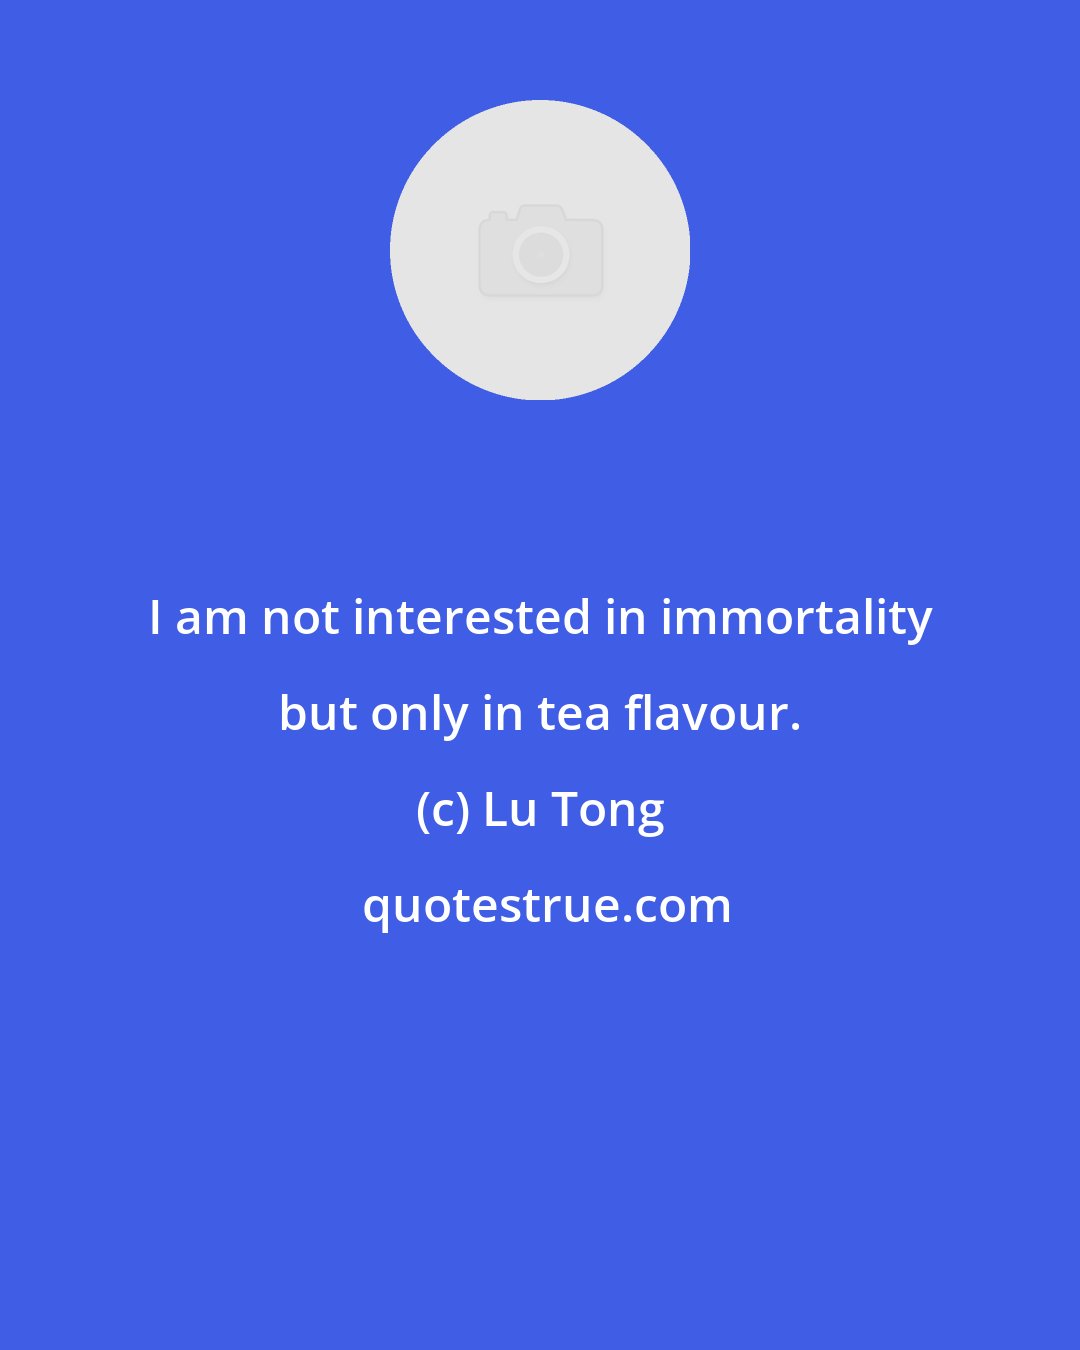 Lu Tong: I am not interested in immortality but only in tea flavour.